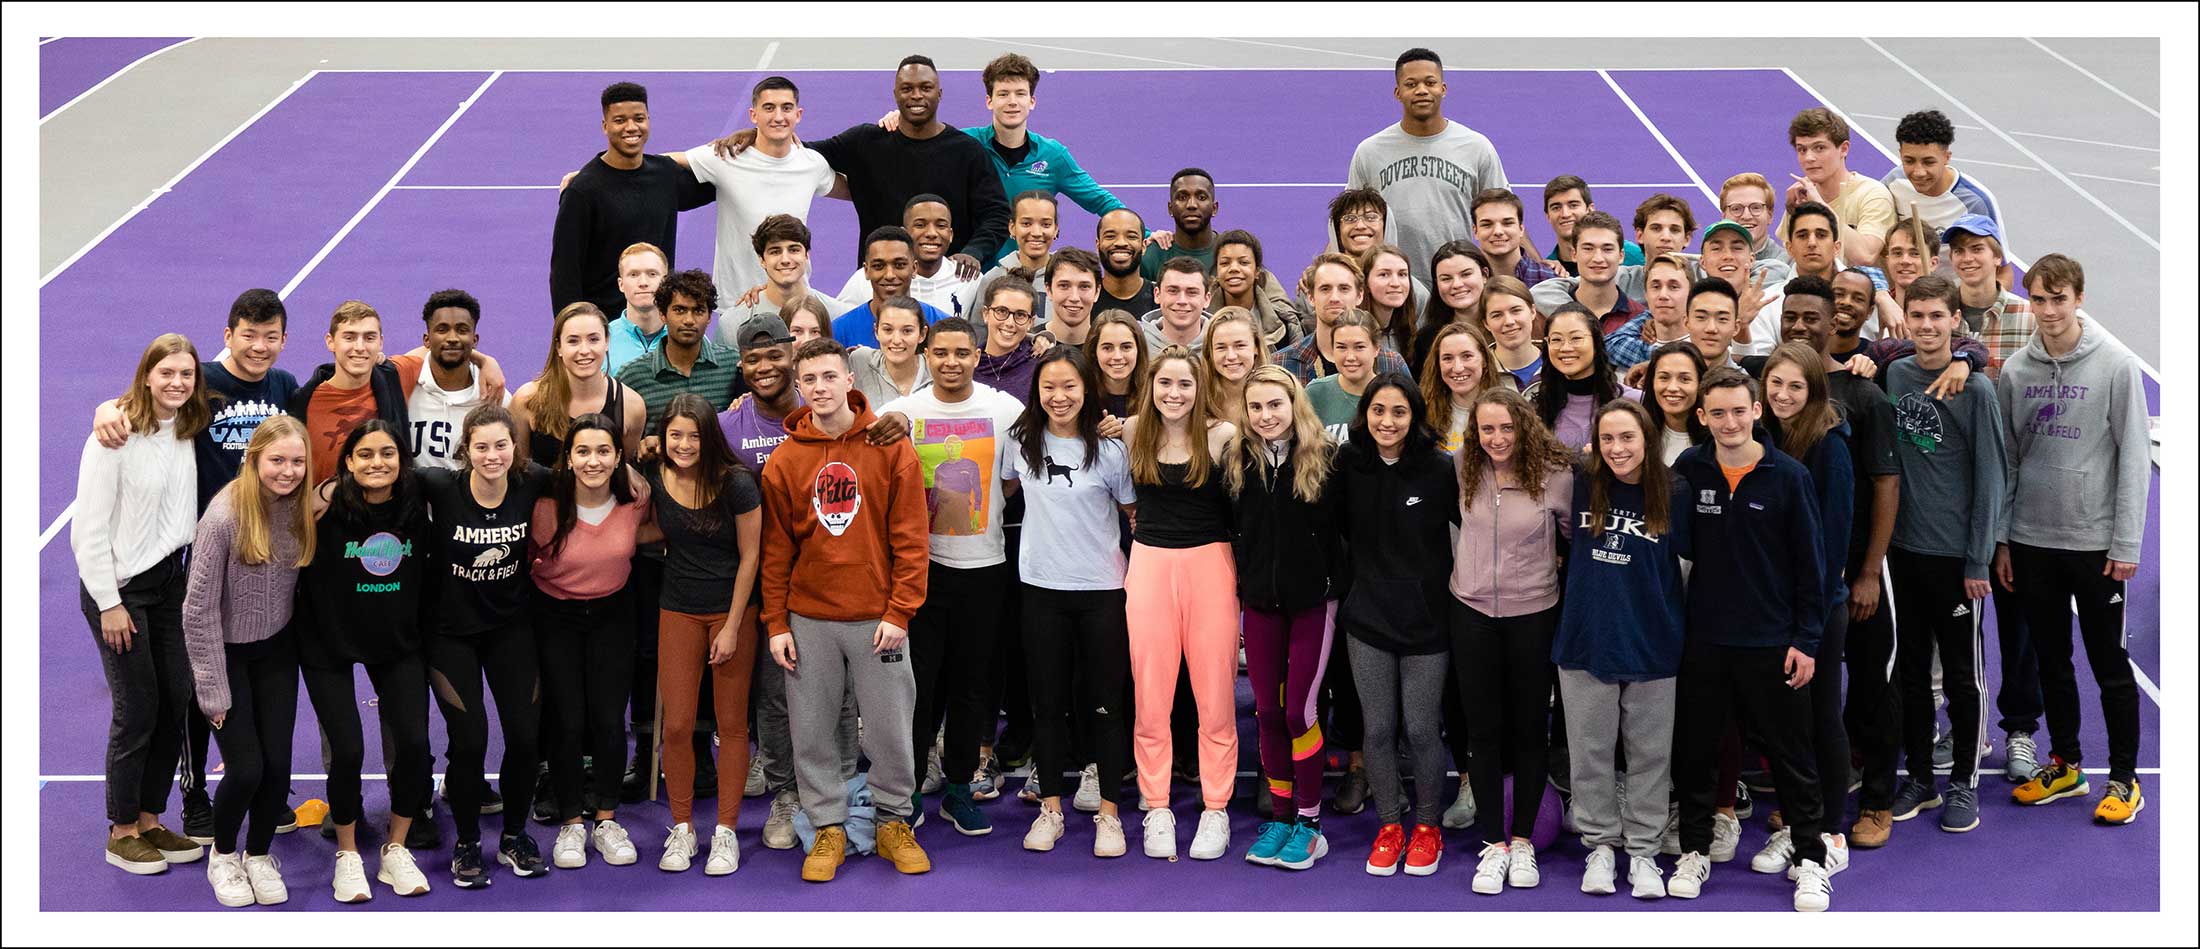 The Amherst College track and field team